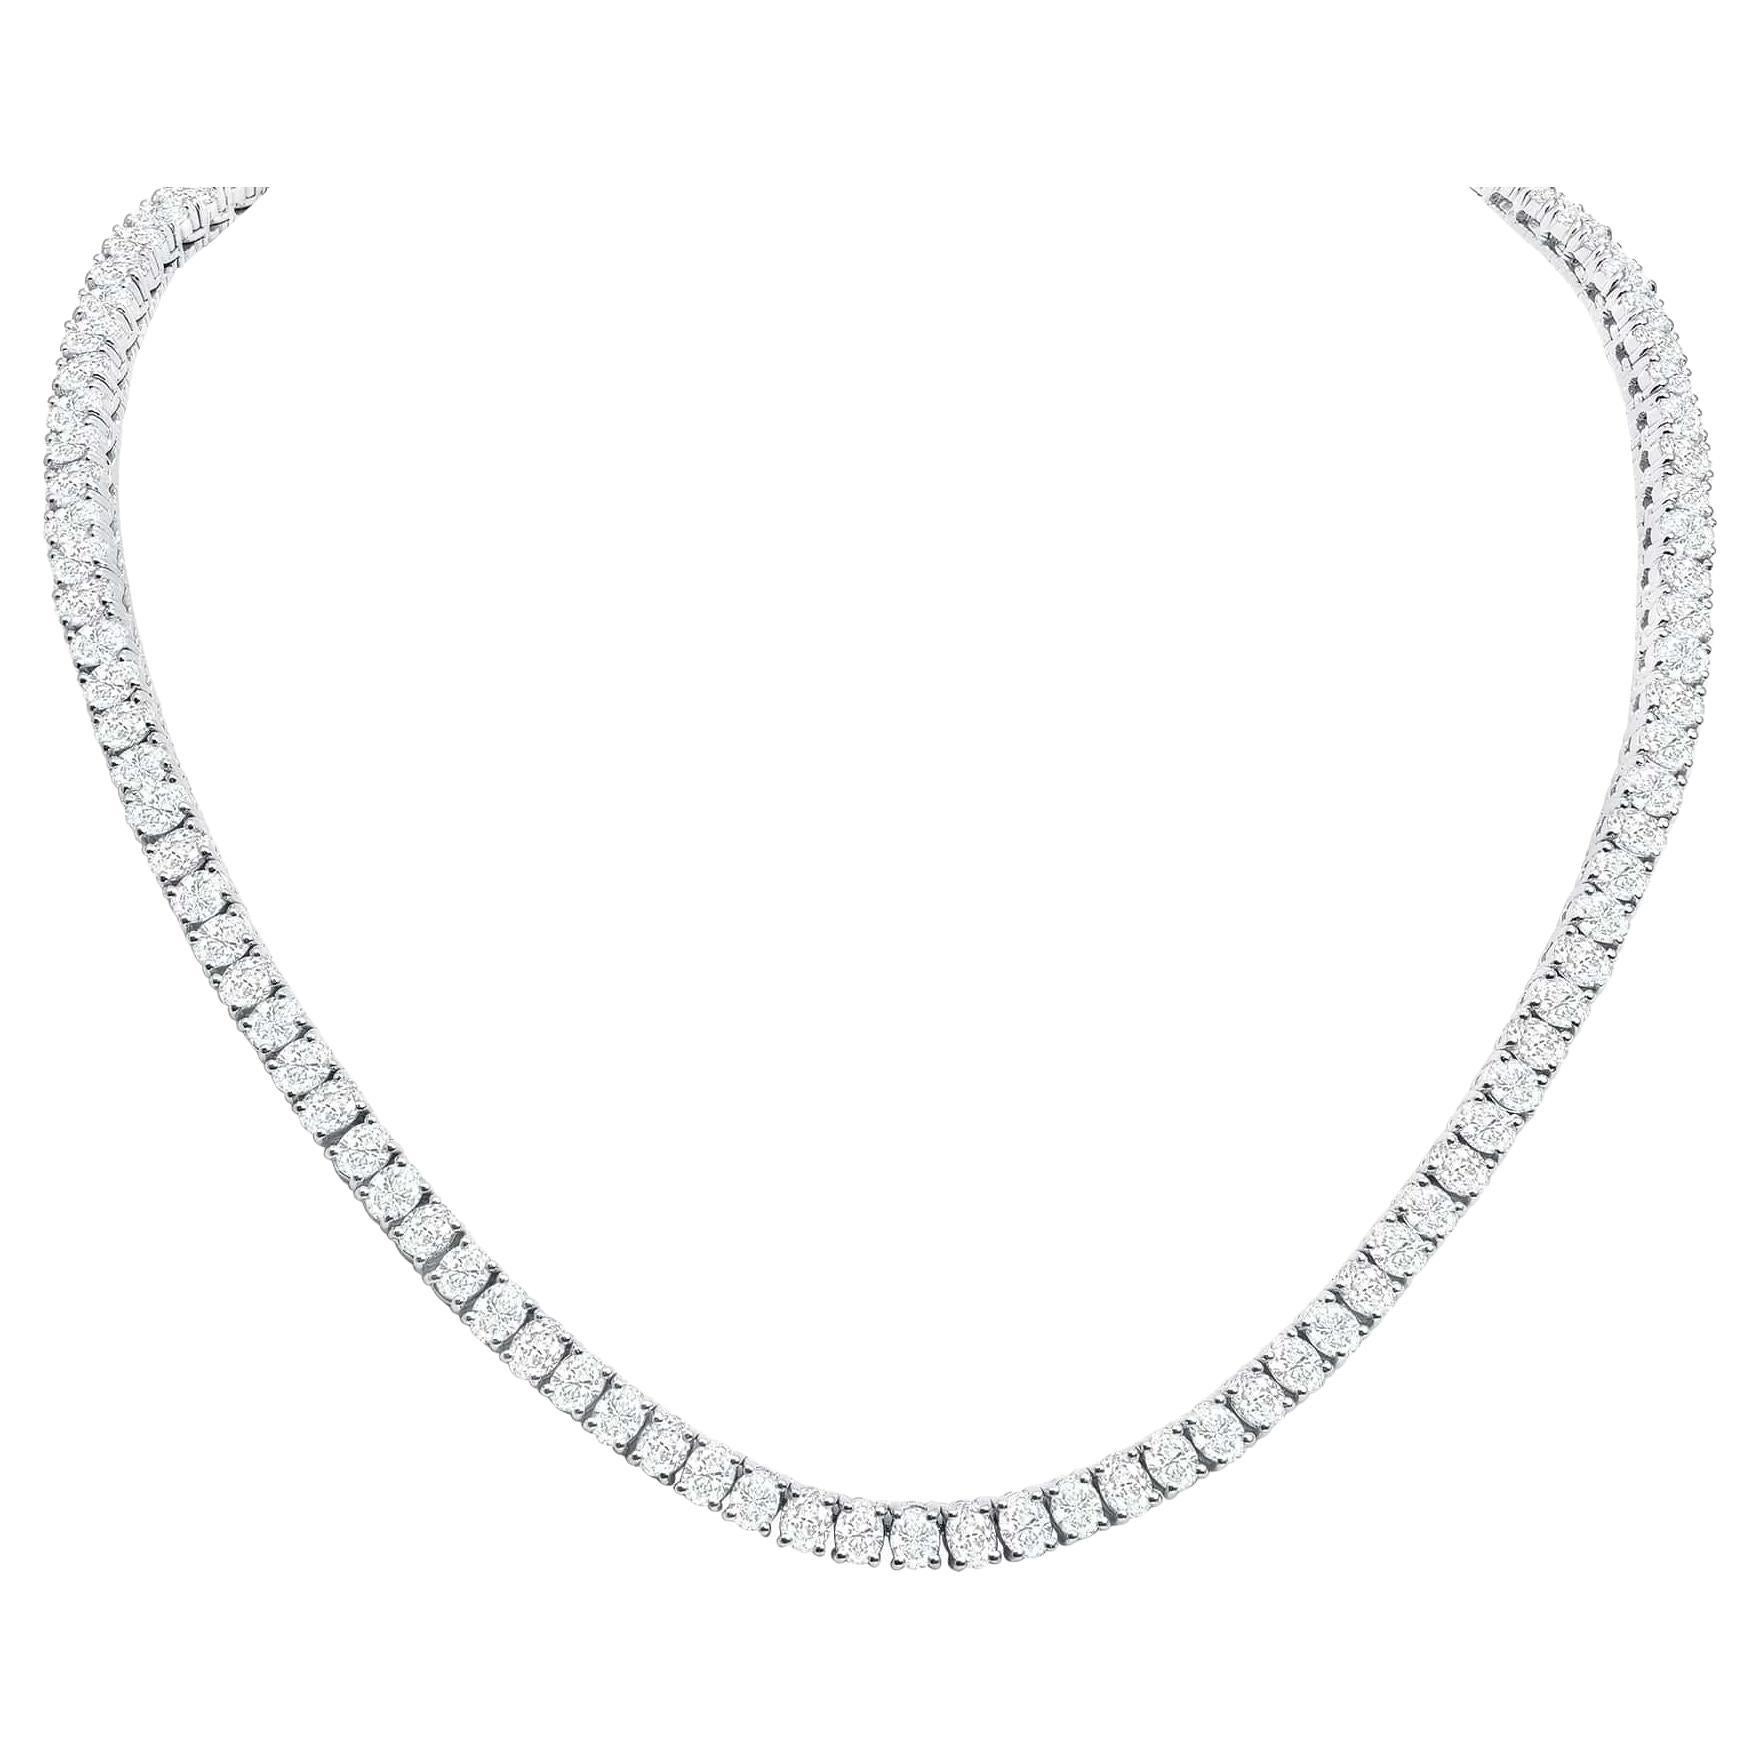 This diamond tennis necklace features beautifully cut oval diamonds set gorgeously in 18k gold.

Necklace Information
Metal : 18k Gold
Diamond Cut : Oval Natural Diamond 
Total Diamond Carats : 20ct
Diamond Clarity : VS -SI
Diamond Color : F-G
Size